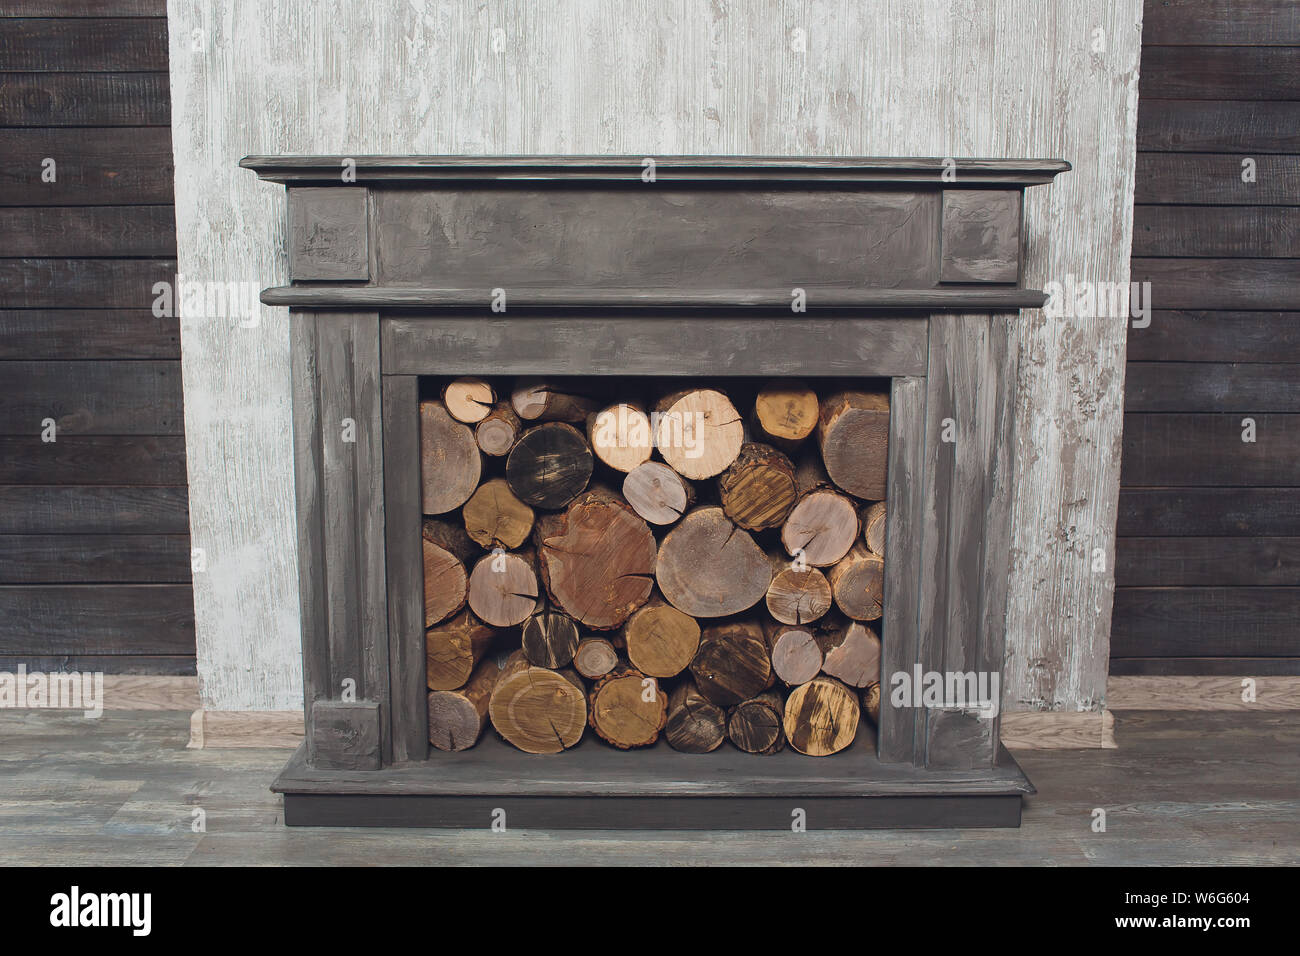 Tradional Wood Burning Stove in a Brick Fireplace. Stock Photo